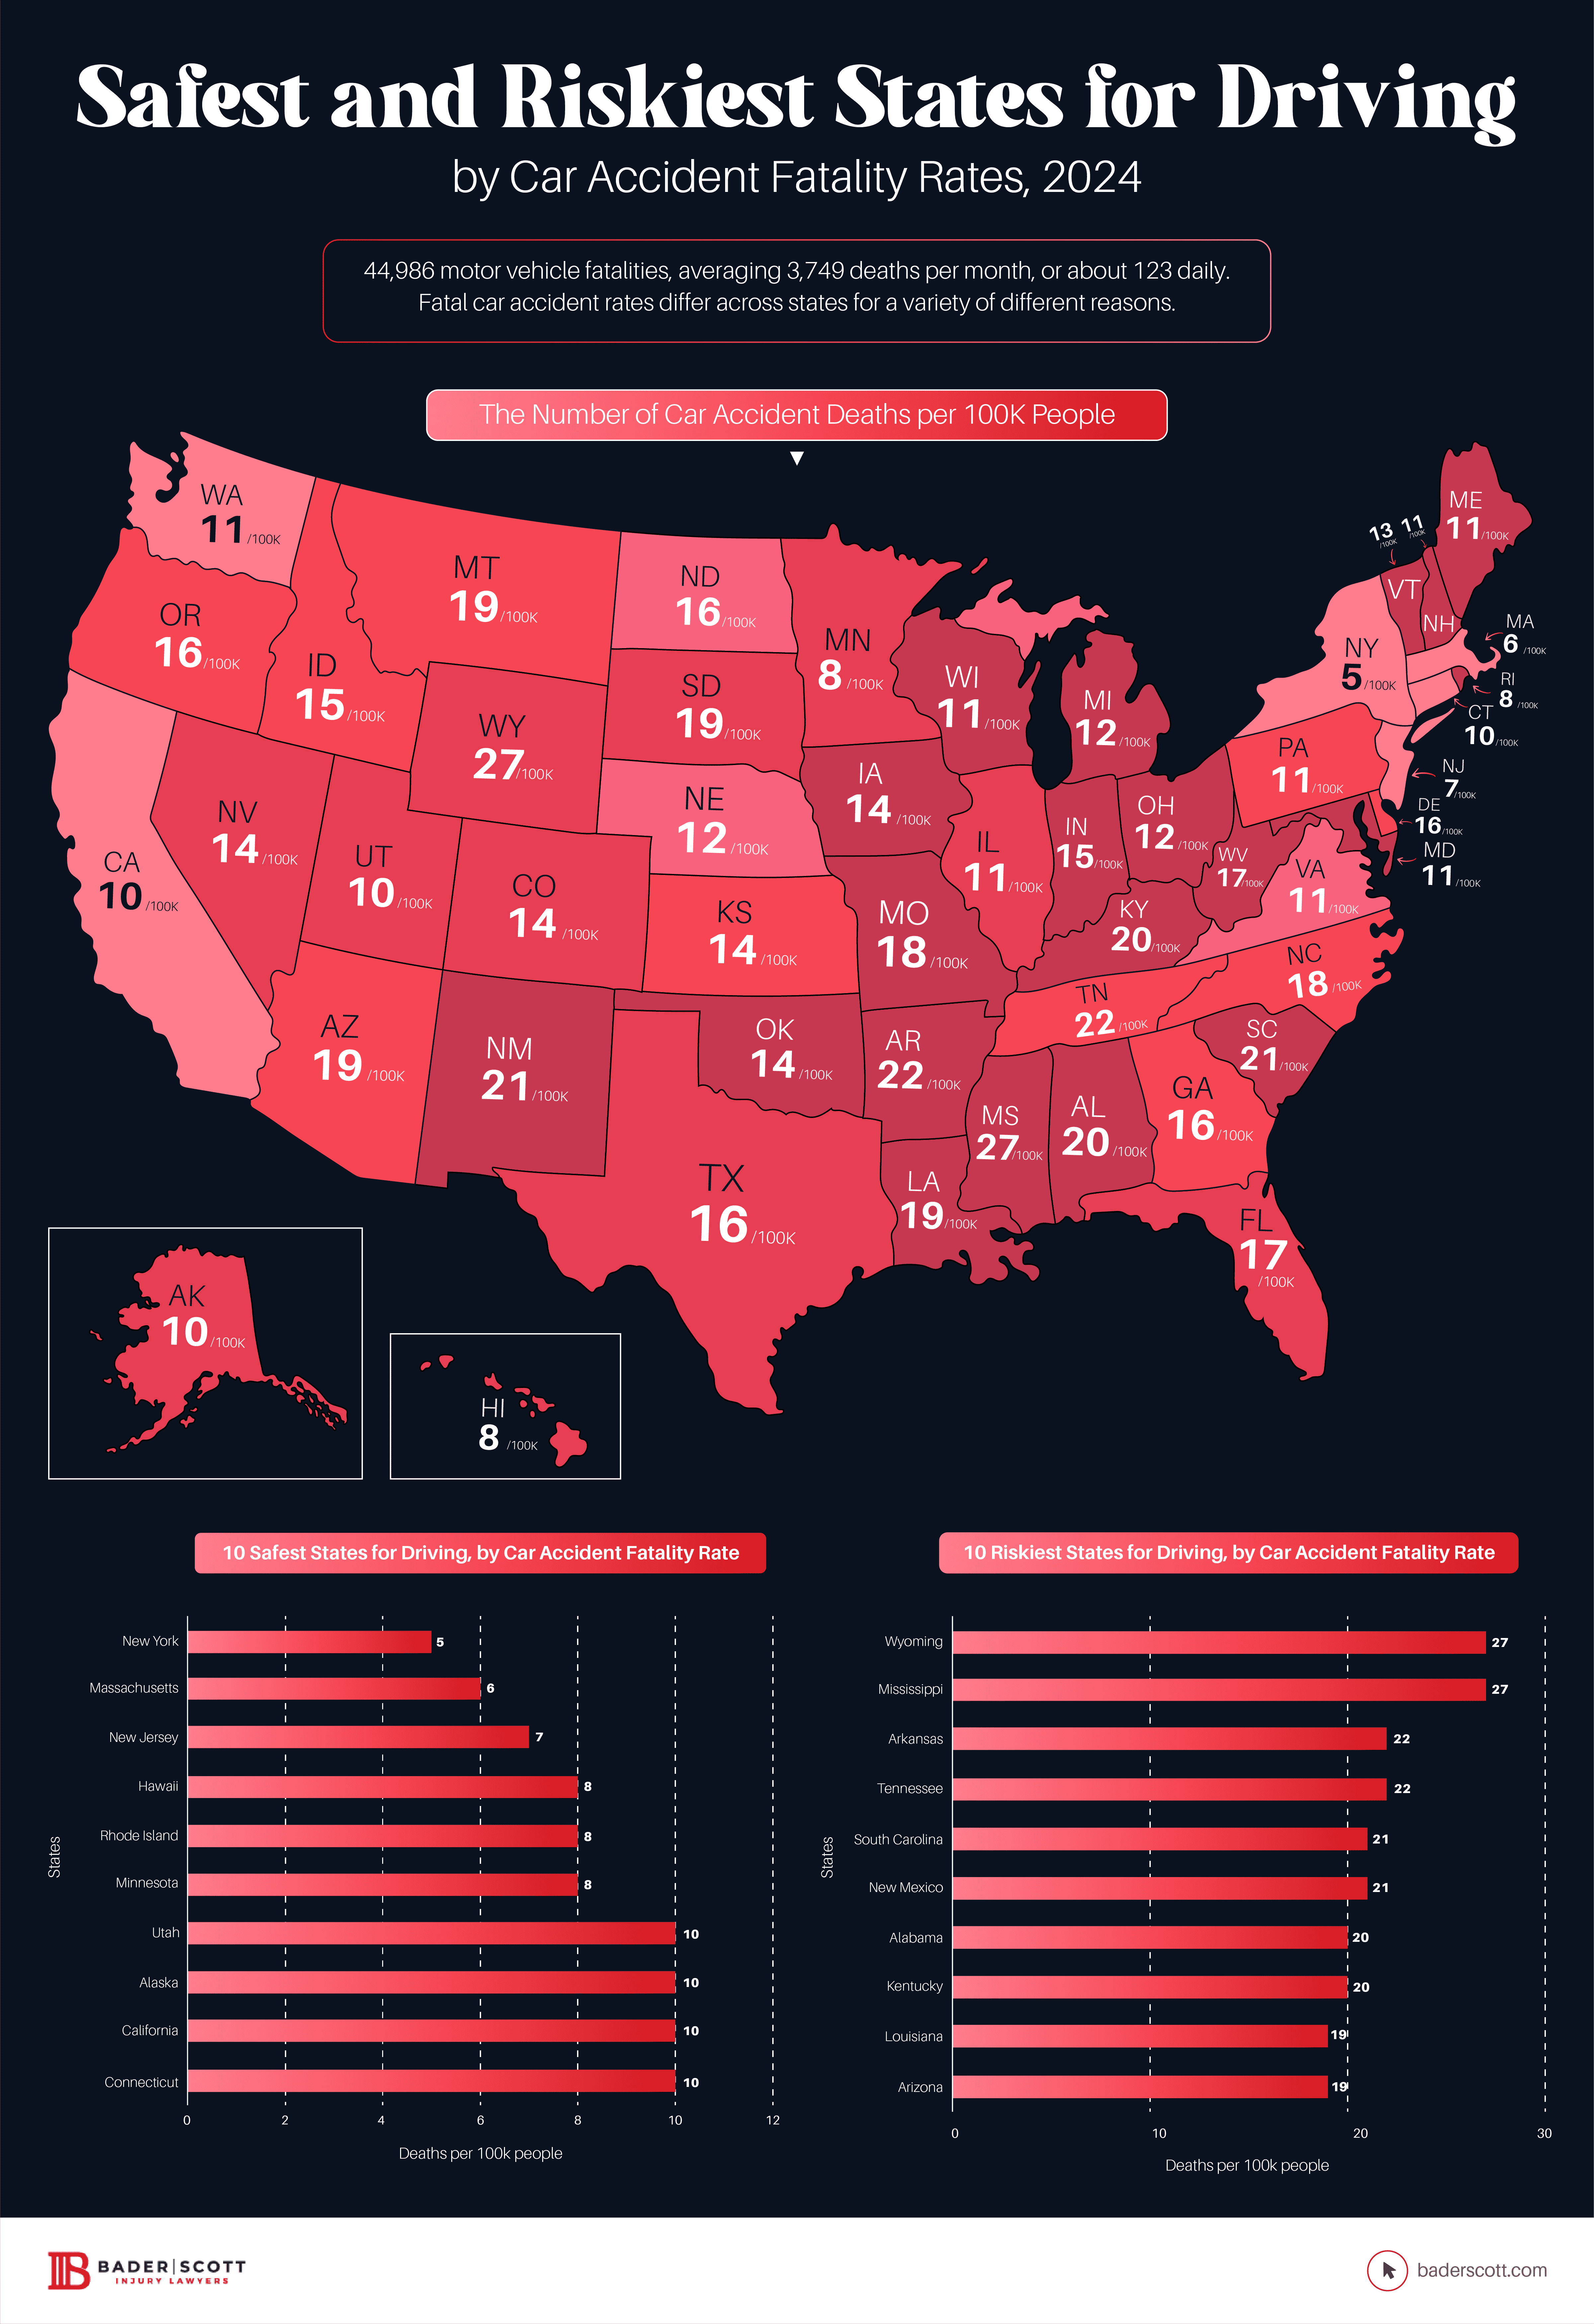 Safest and Riskiest States for Driving by Car Accident Fatality Rates